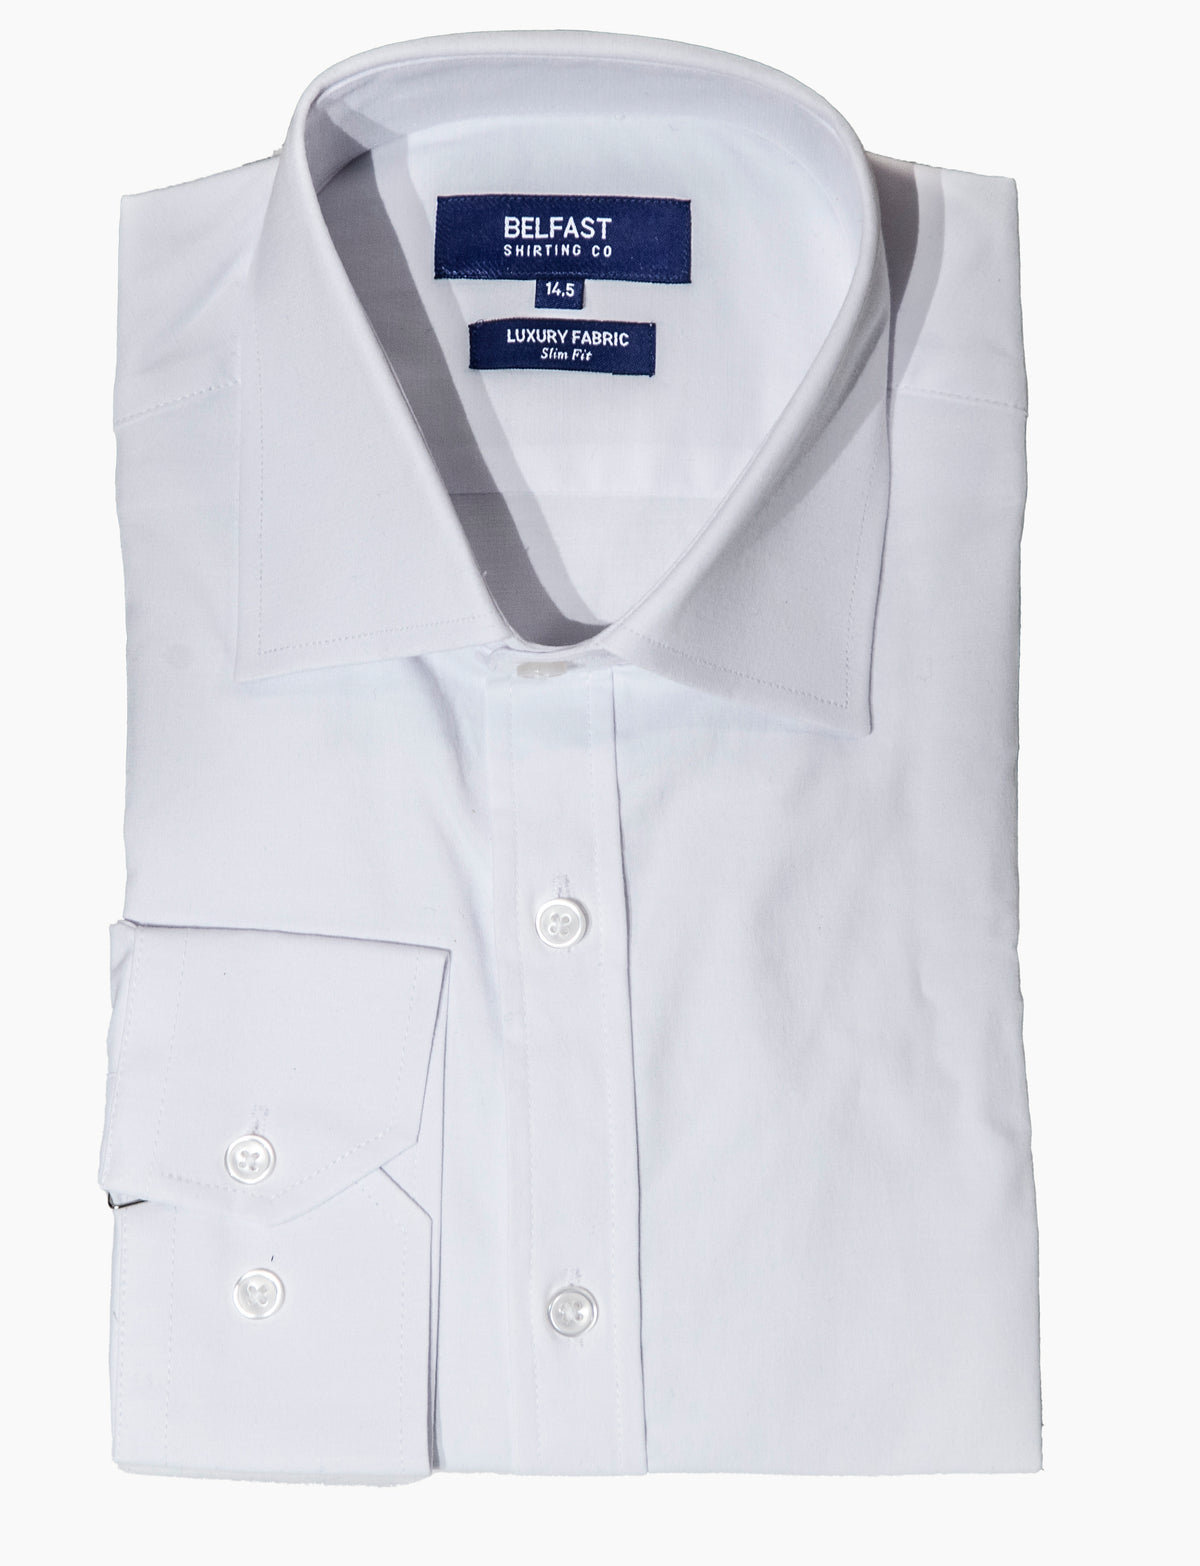 Belfast Mens Classic Fit Solid White Cotton Stretch Spread Collar Dress Shirt